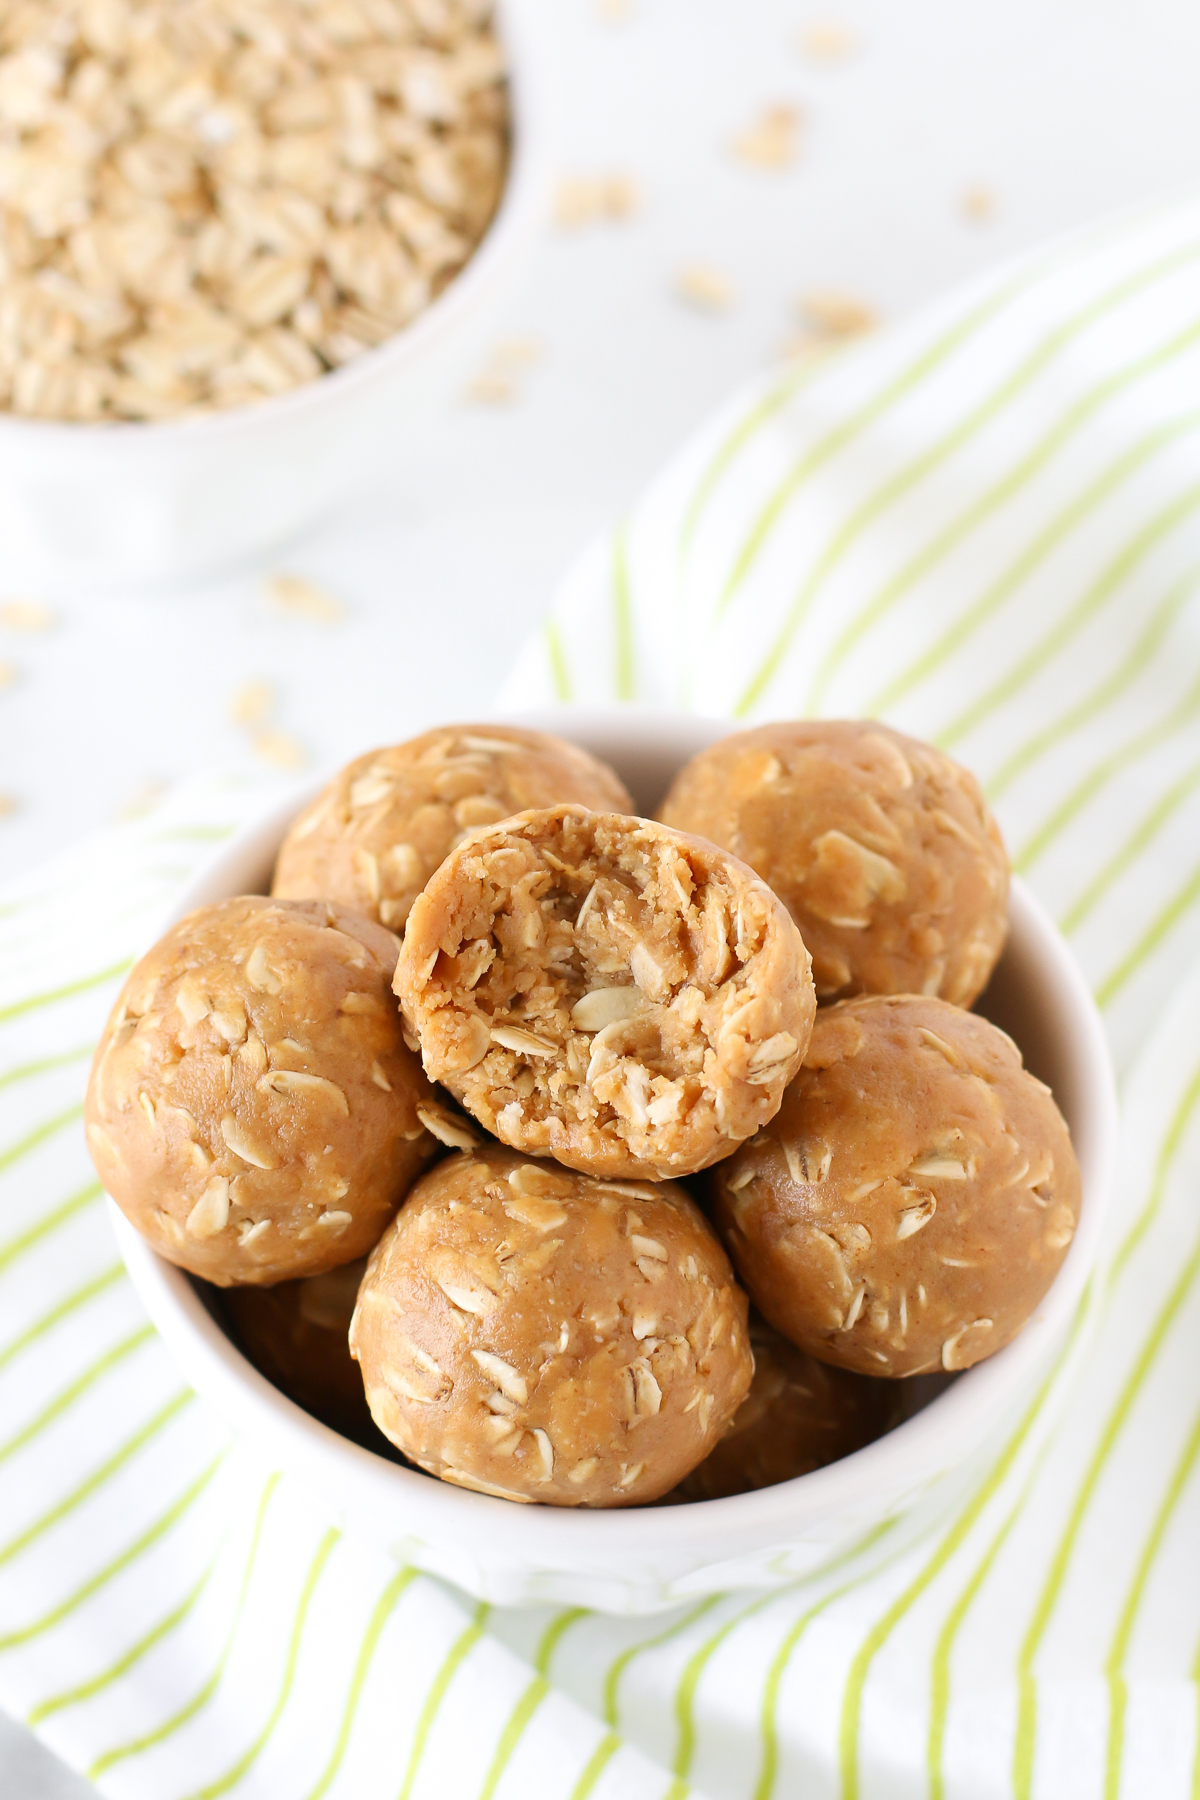 Peanut Butter Energy Bites. These little bites are made with just 4 ingredients and are great for on-the-go snacking!